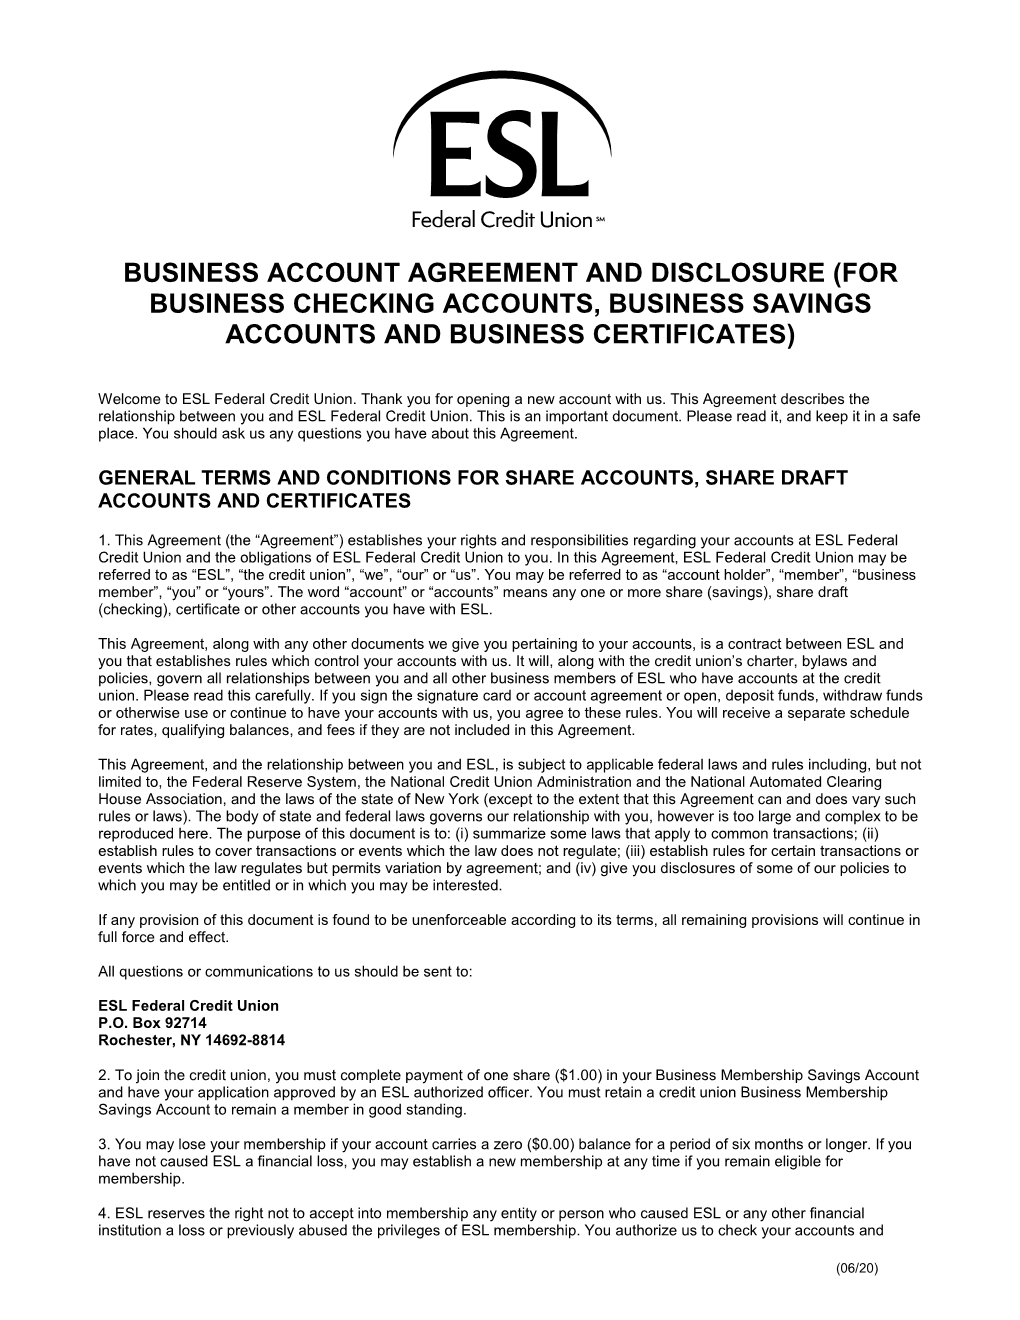 Business Account Agreement and Disclosure (For Business Checking Accounts, Business Savings Accounts and Business Certificates)